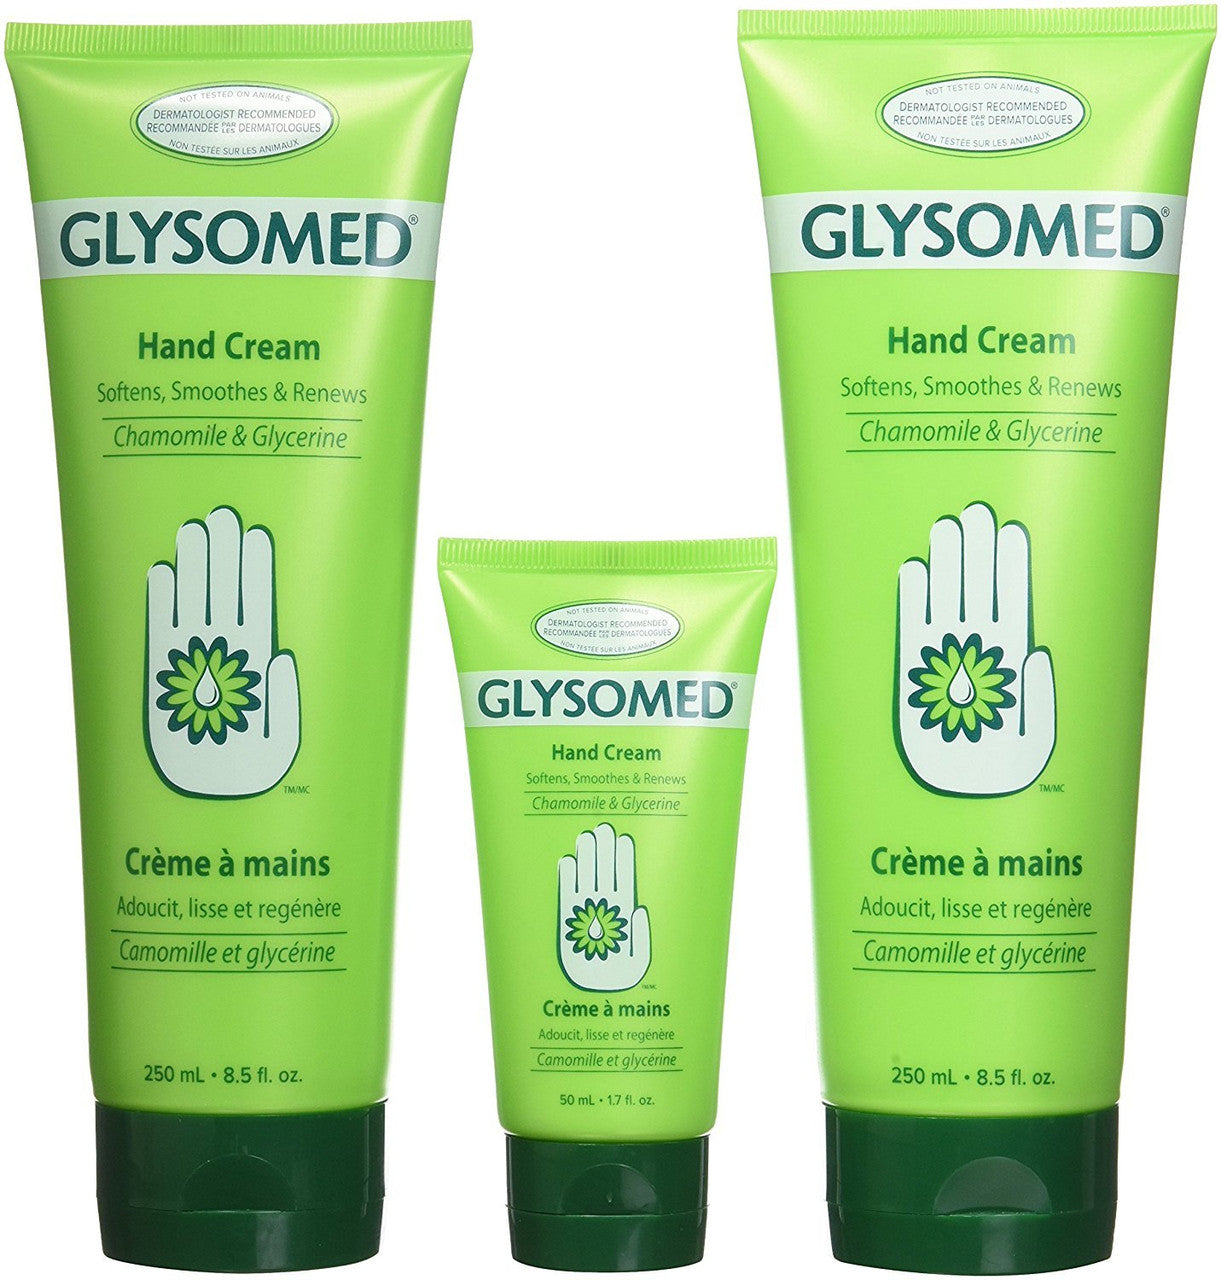 Glysomed Hand Cream Combo Pack, 8.5 Fl Oz (2 Count) + 1.7 Fl Oz (1 Count)